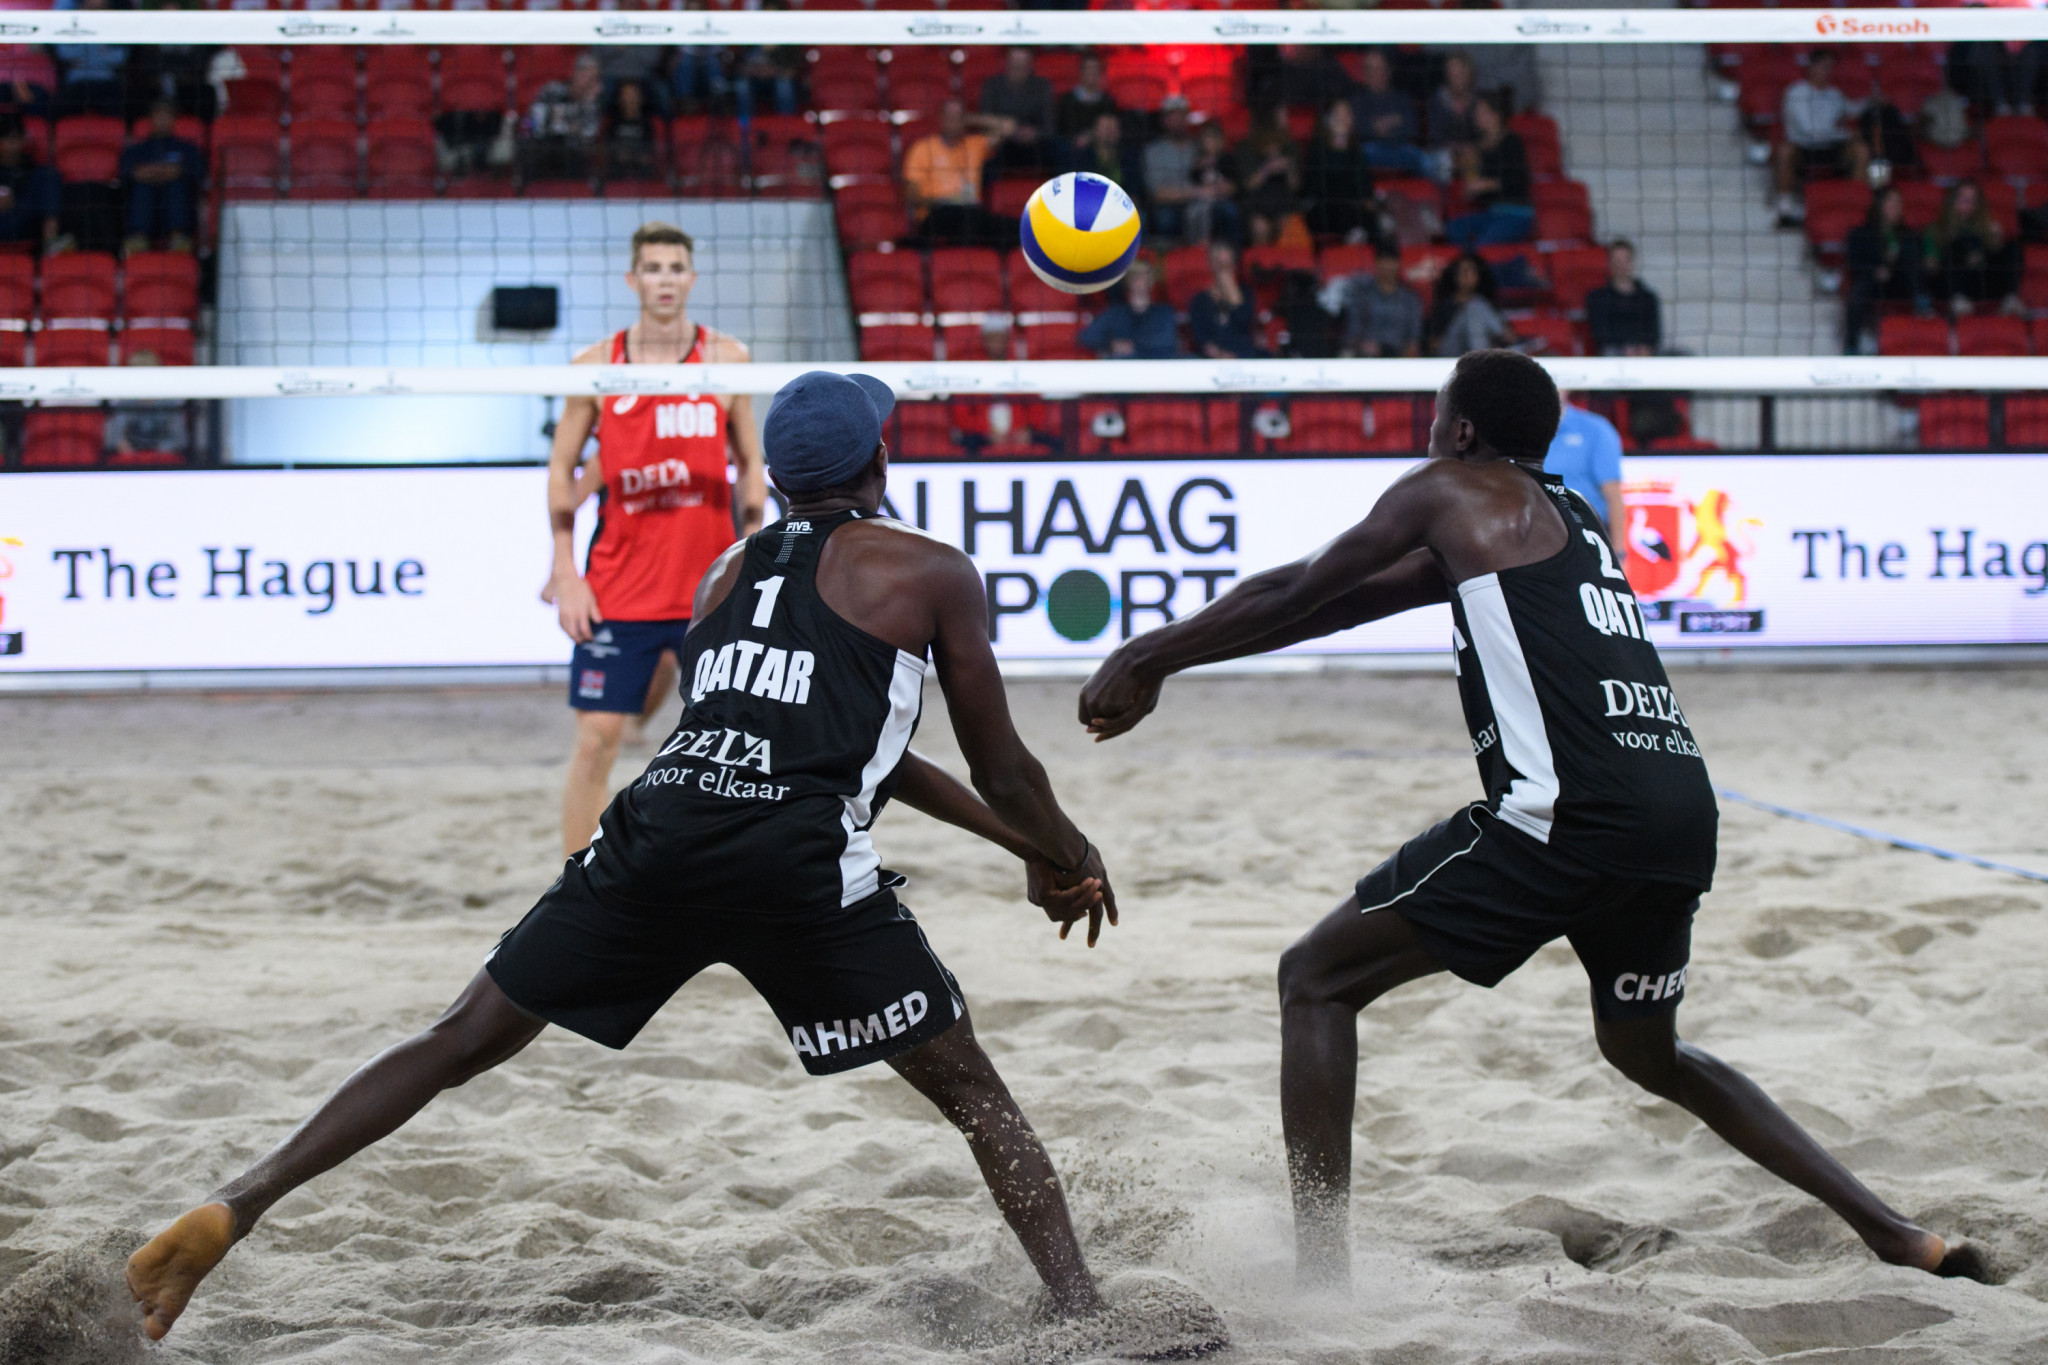 Qatari duo qualify for knock-out round in first appearance on FIVB Beach World Tour